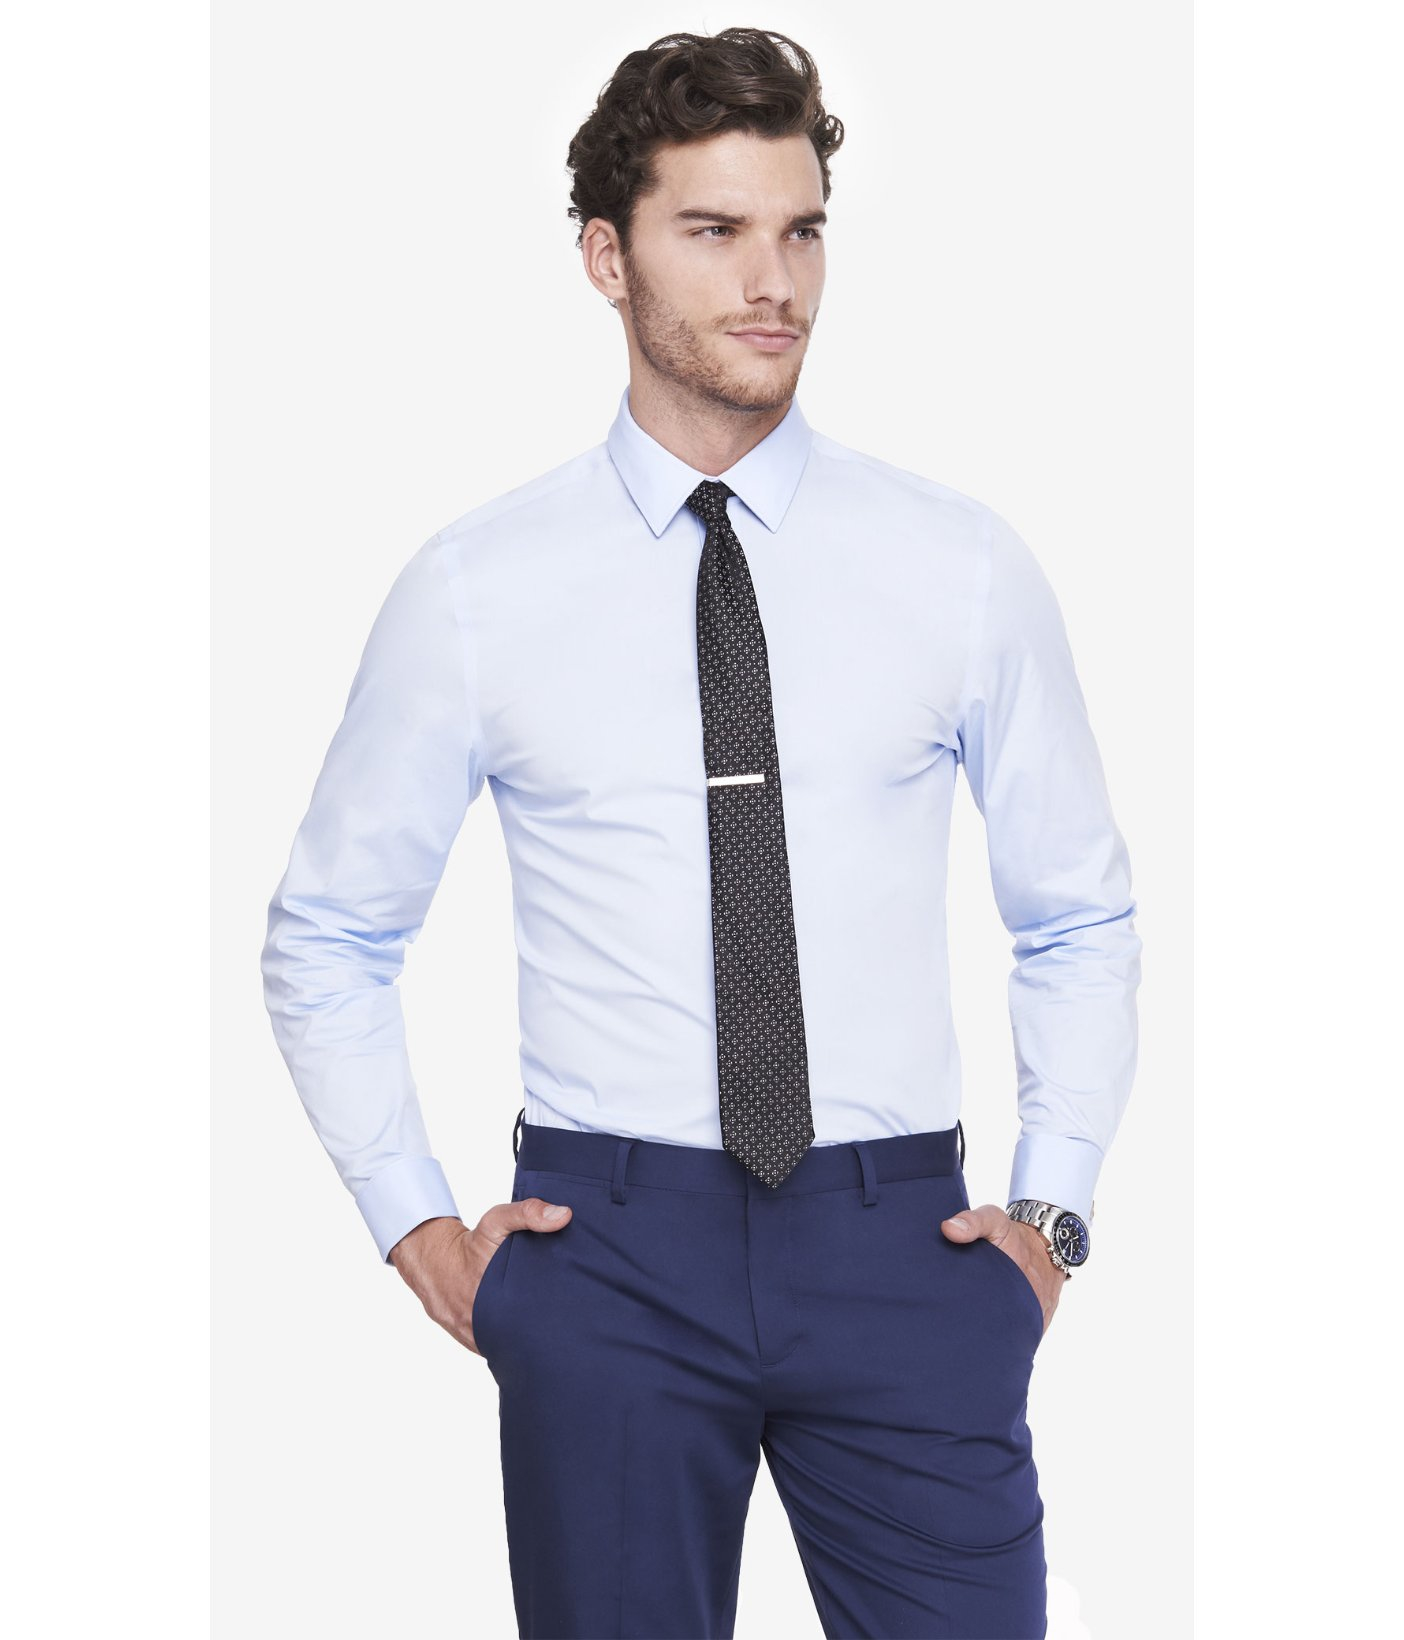 Lyst - Express Modern Fit French Cuff 1mx Shirt in Blue for Men